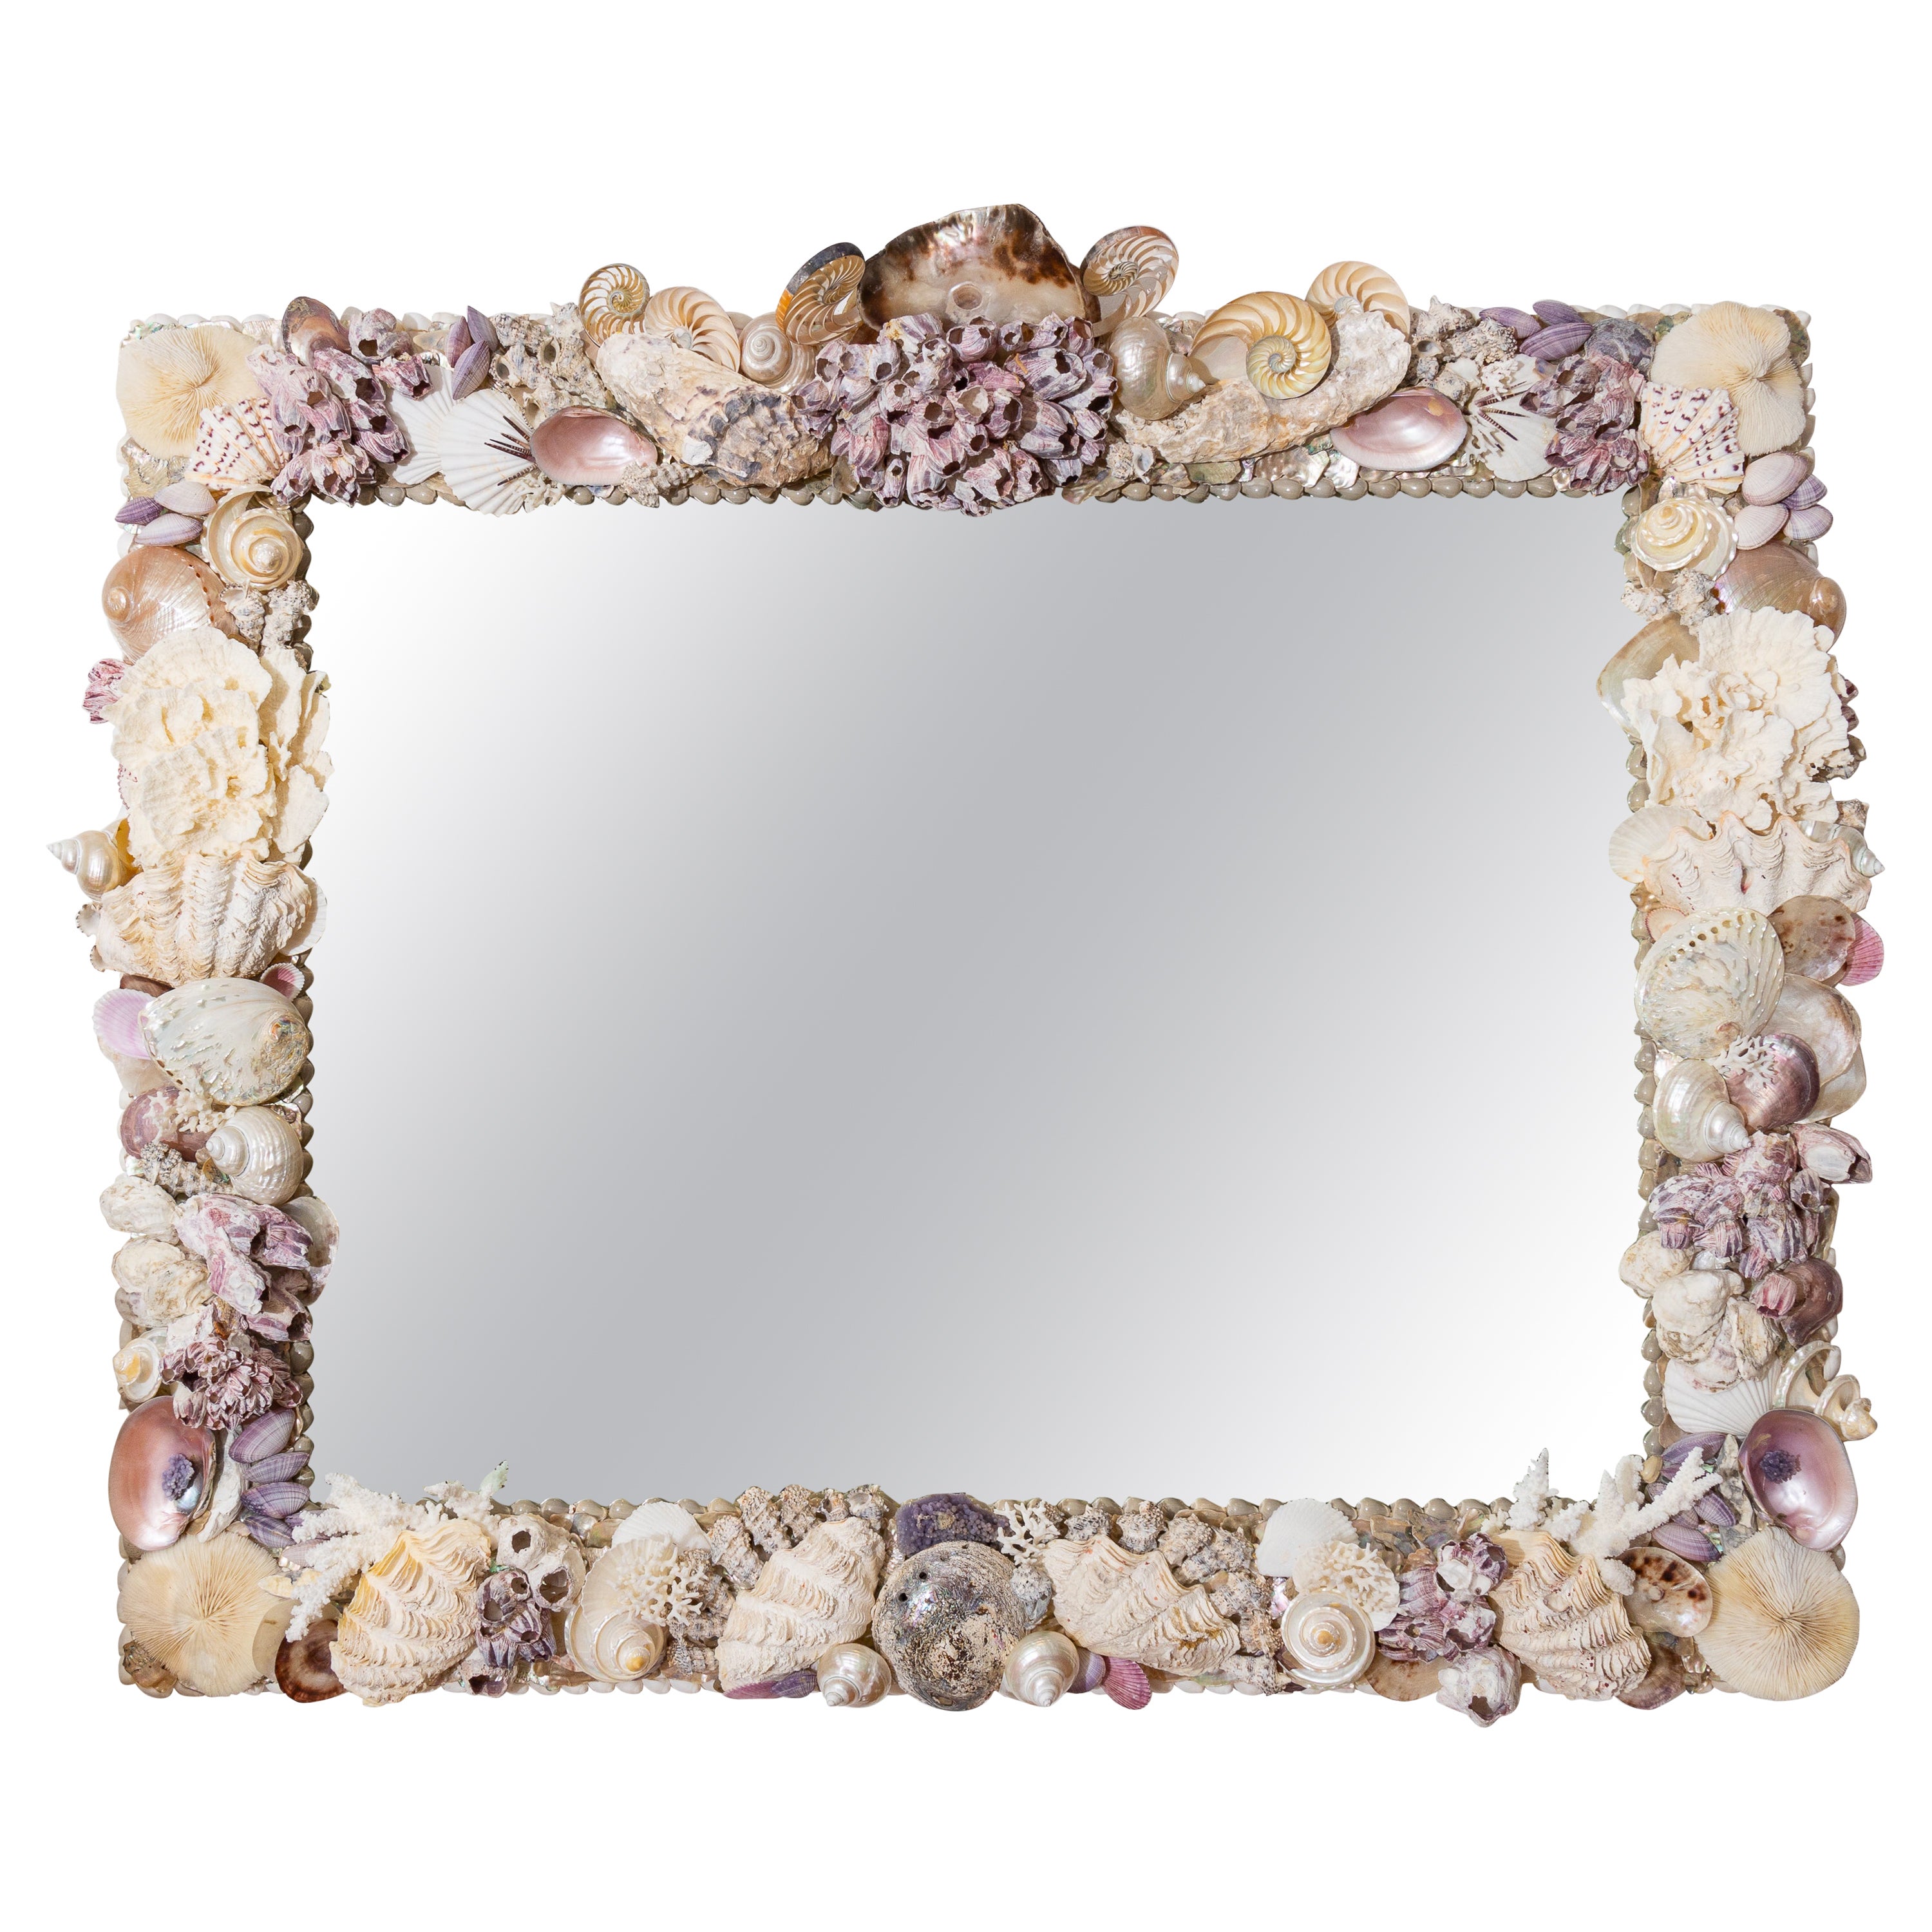 Spectacular Oversized Shell Encrusted Mirror